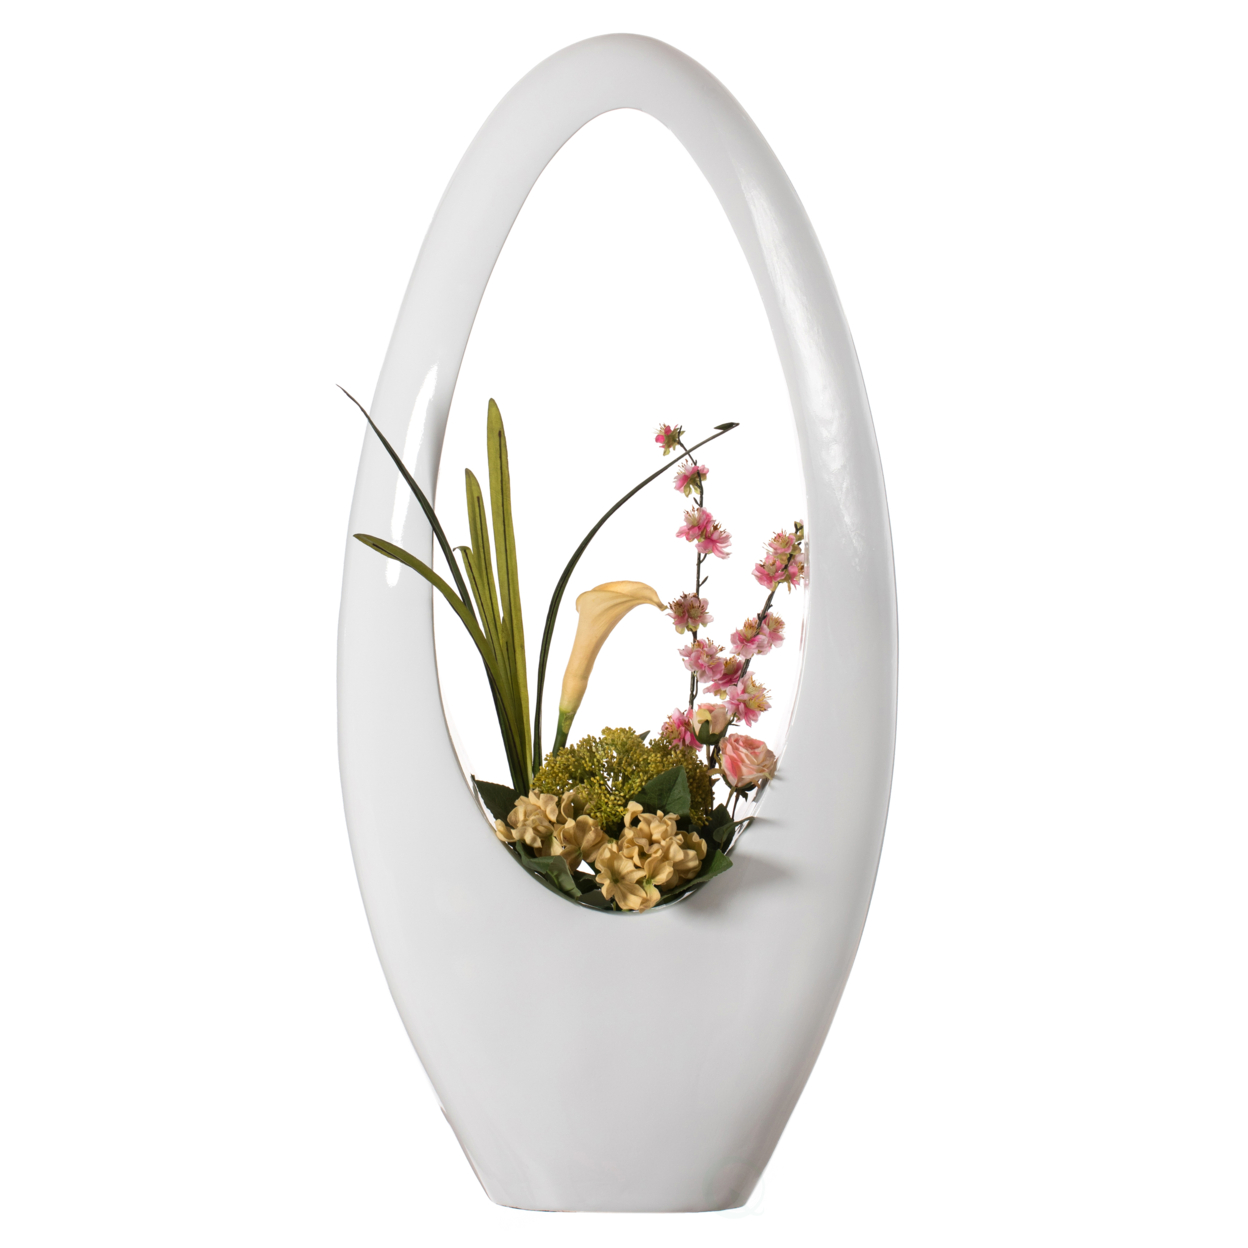 Modern Decorative White Oval Centerpiece Vase Wedding Flower Stand Holder, For Living Room, Entryway Or Dining Room, 40 Inch